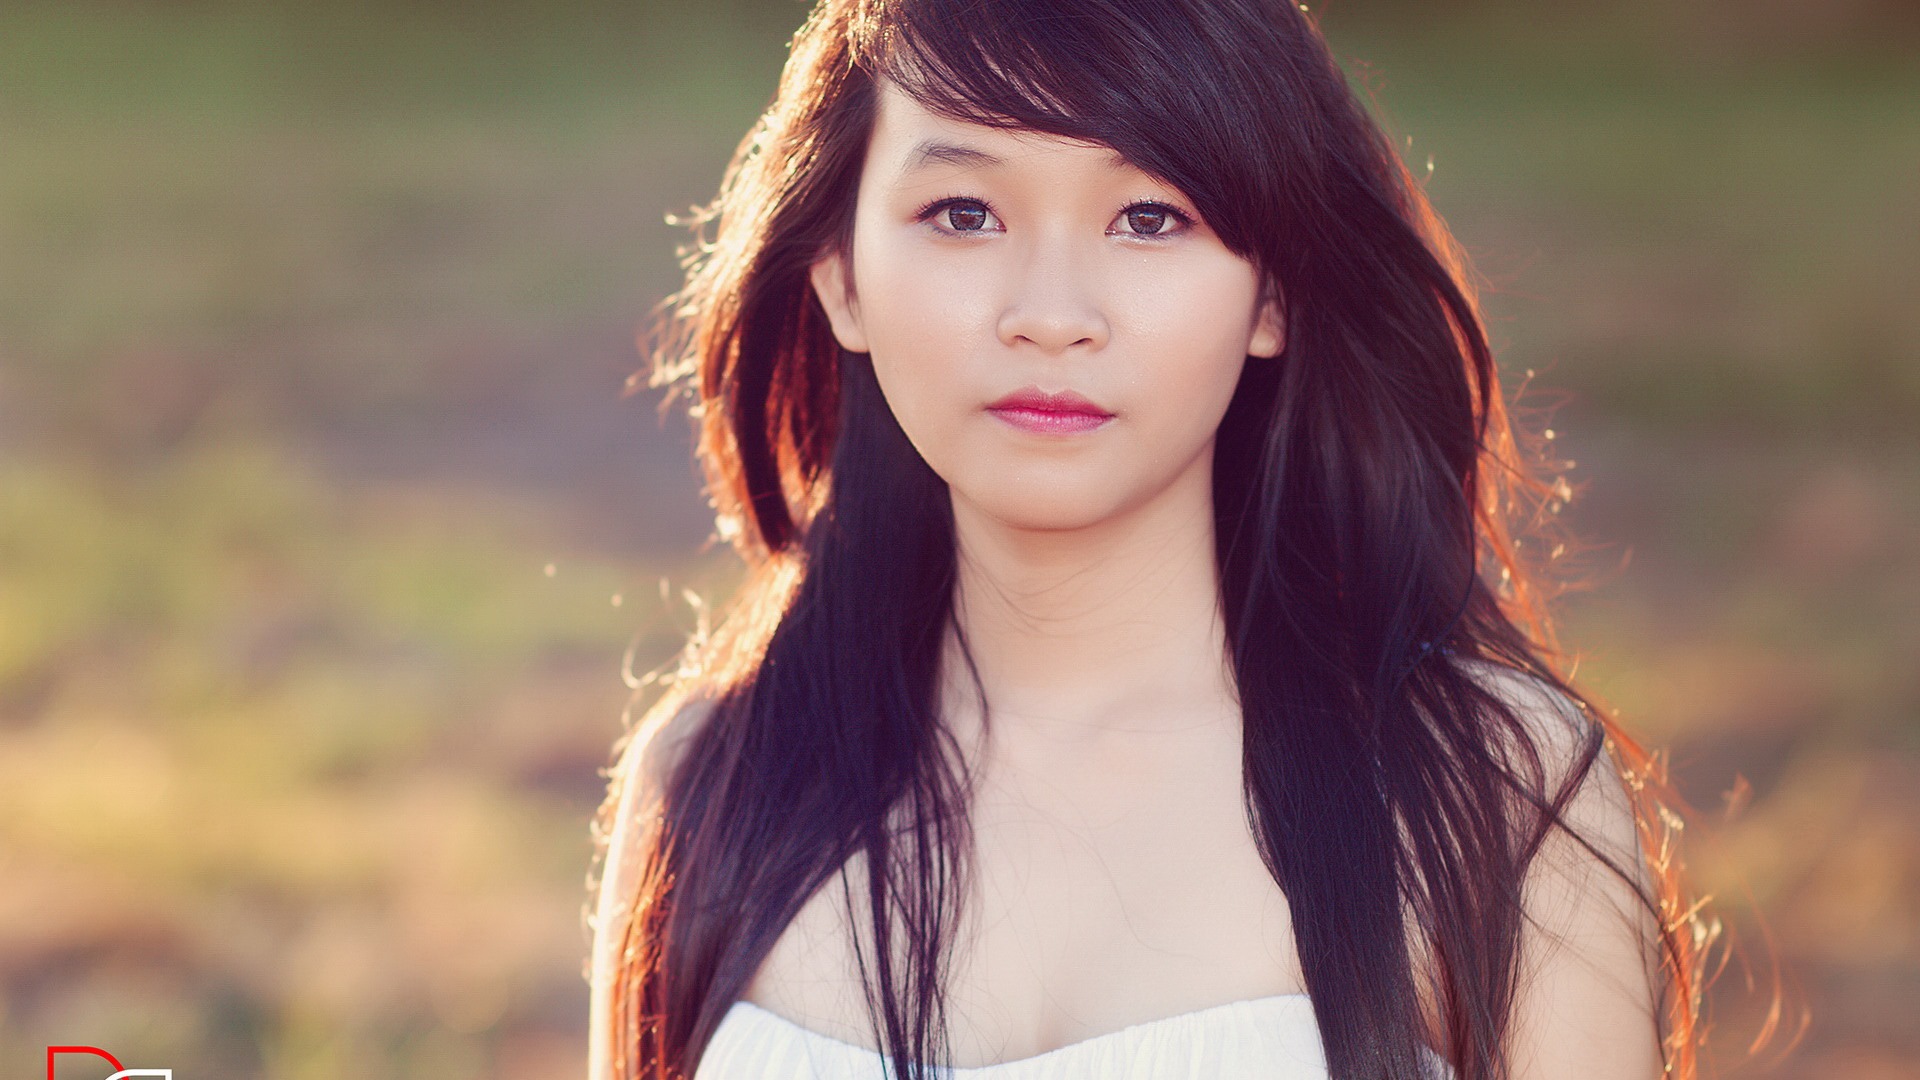 Pure and lovely young Asian girl HD wallpapers collection (4) #25 - 1920x1080